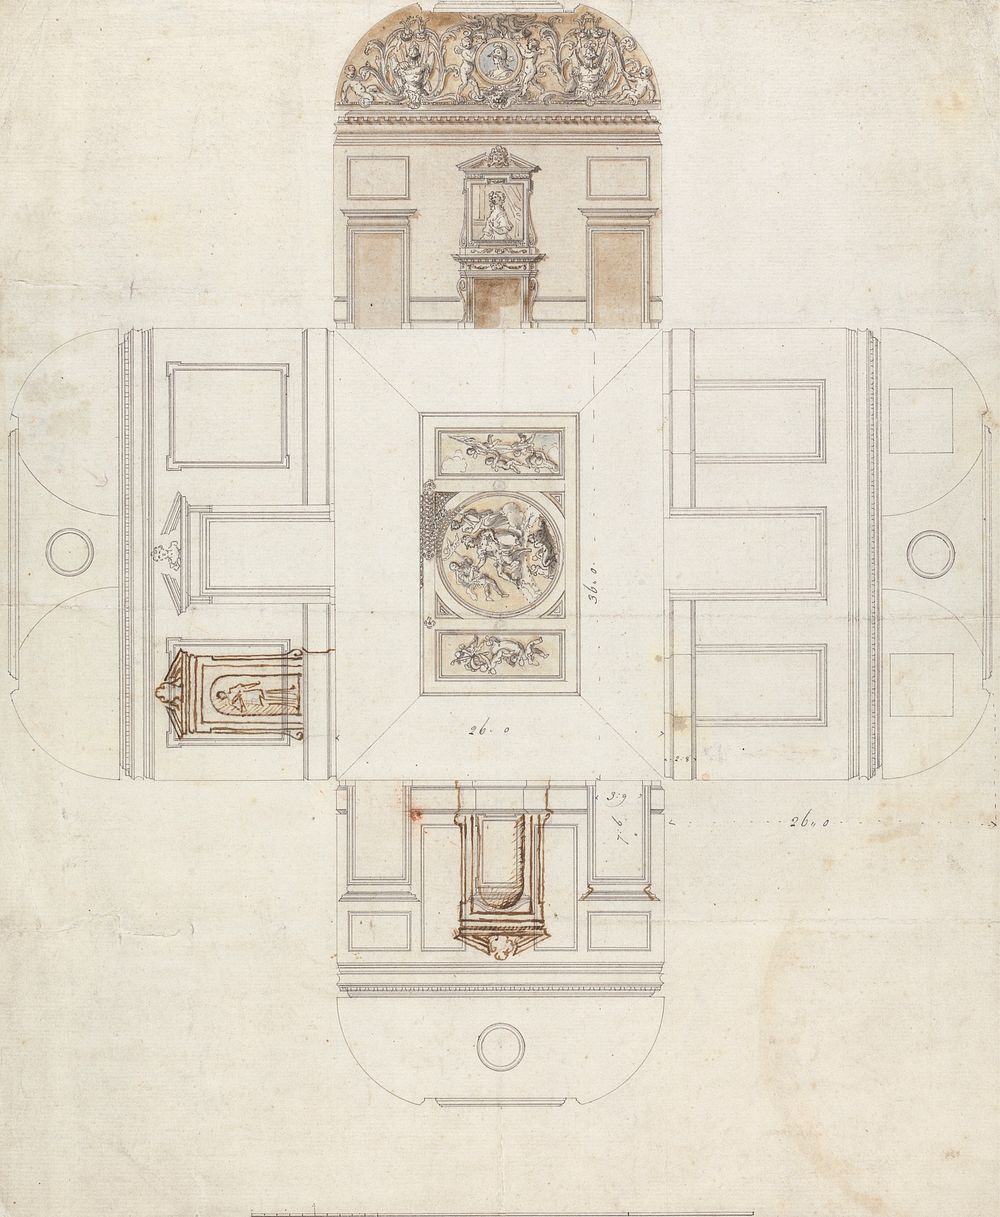 Stowe House, Buckinghamshire: Design for Ceiling and Wall Decoration